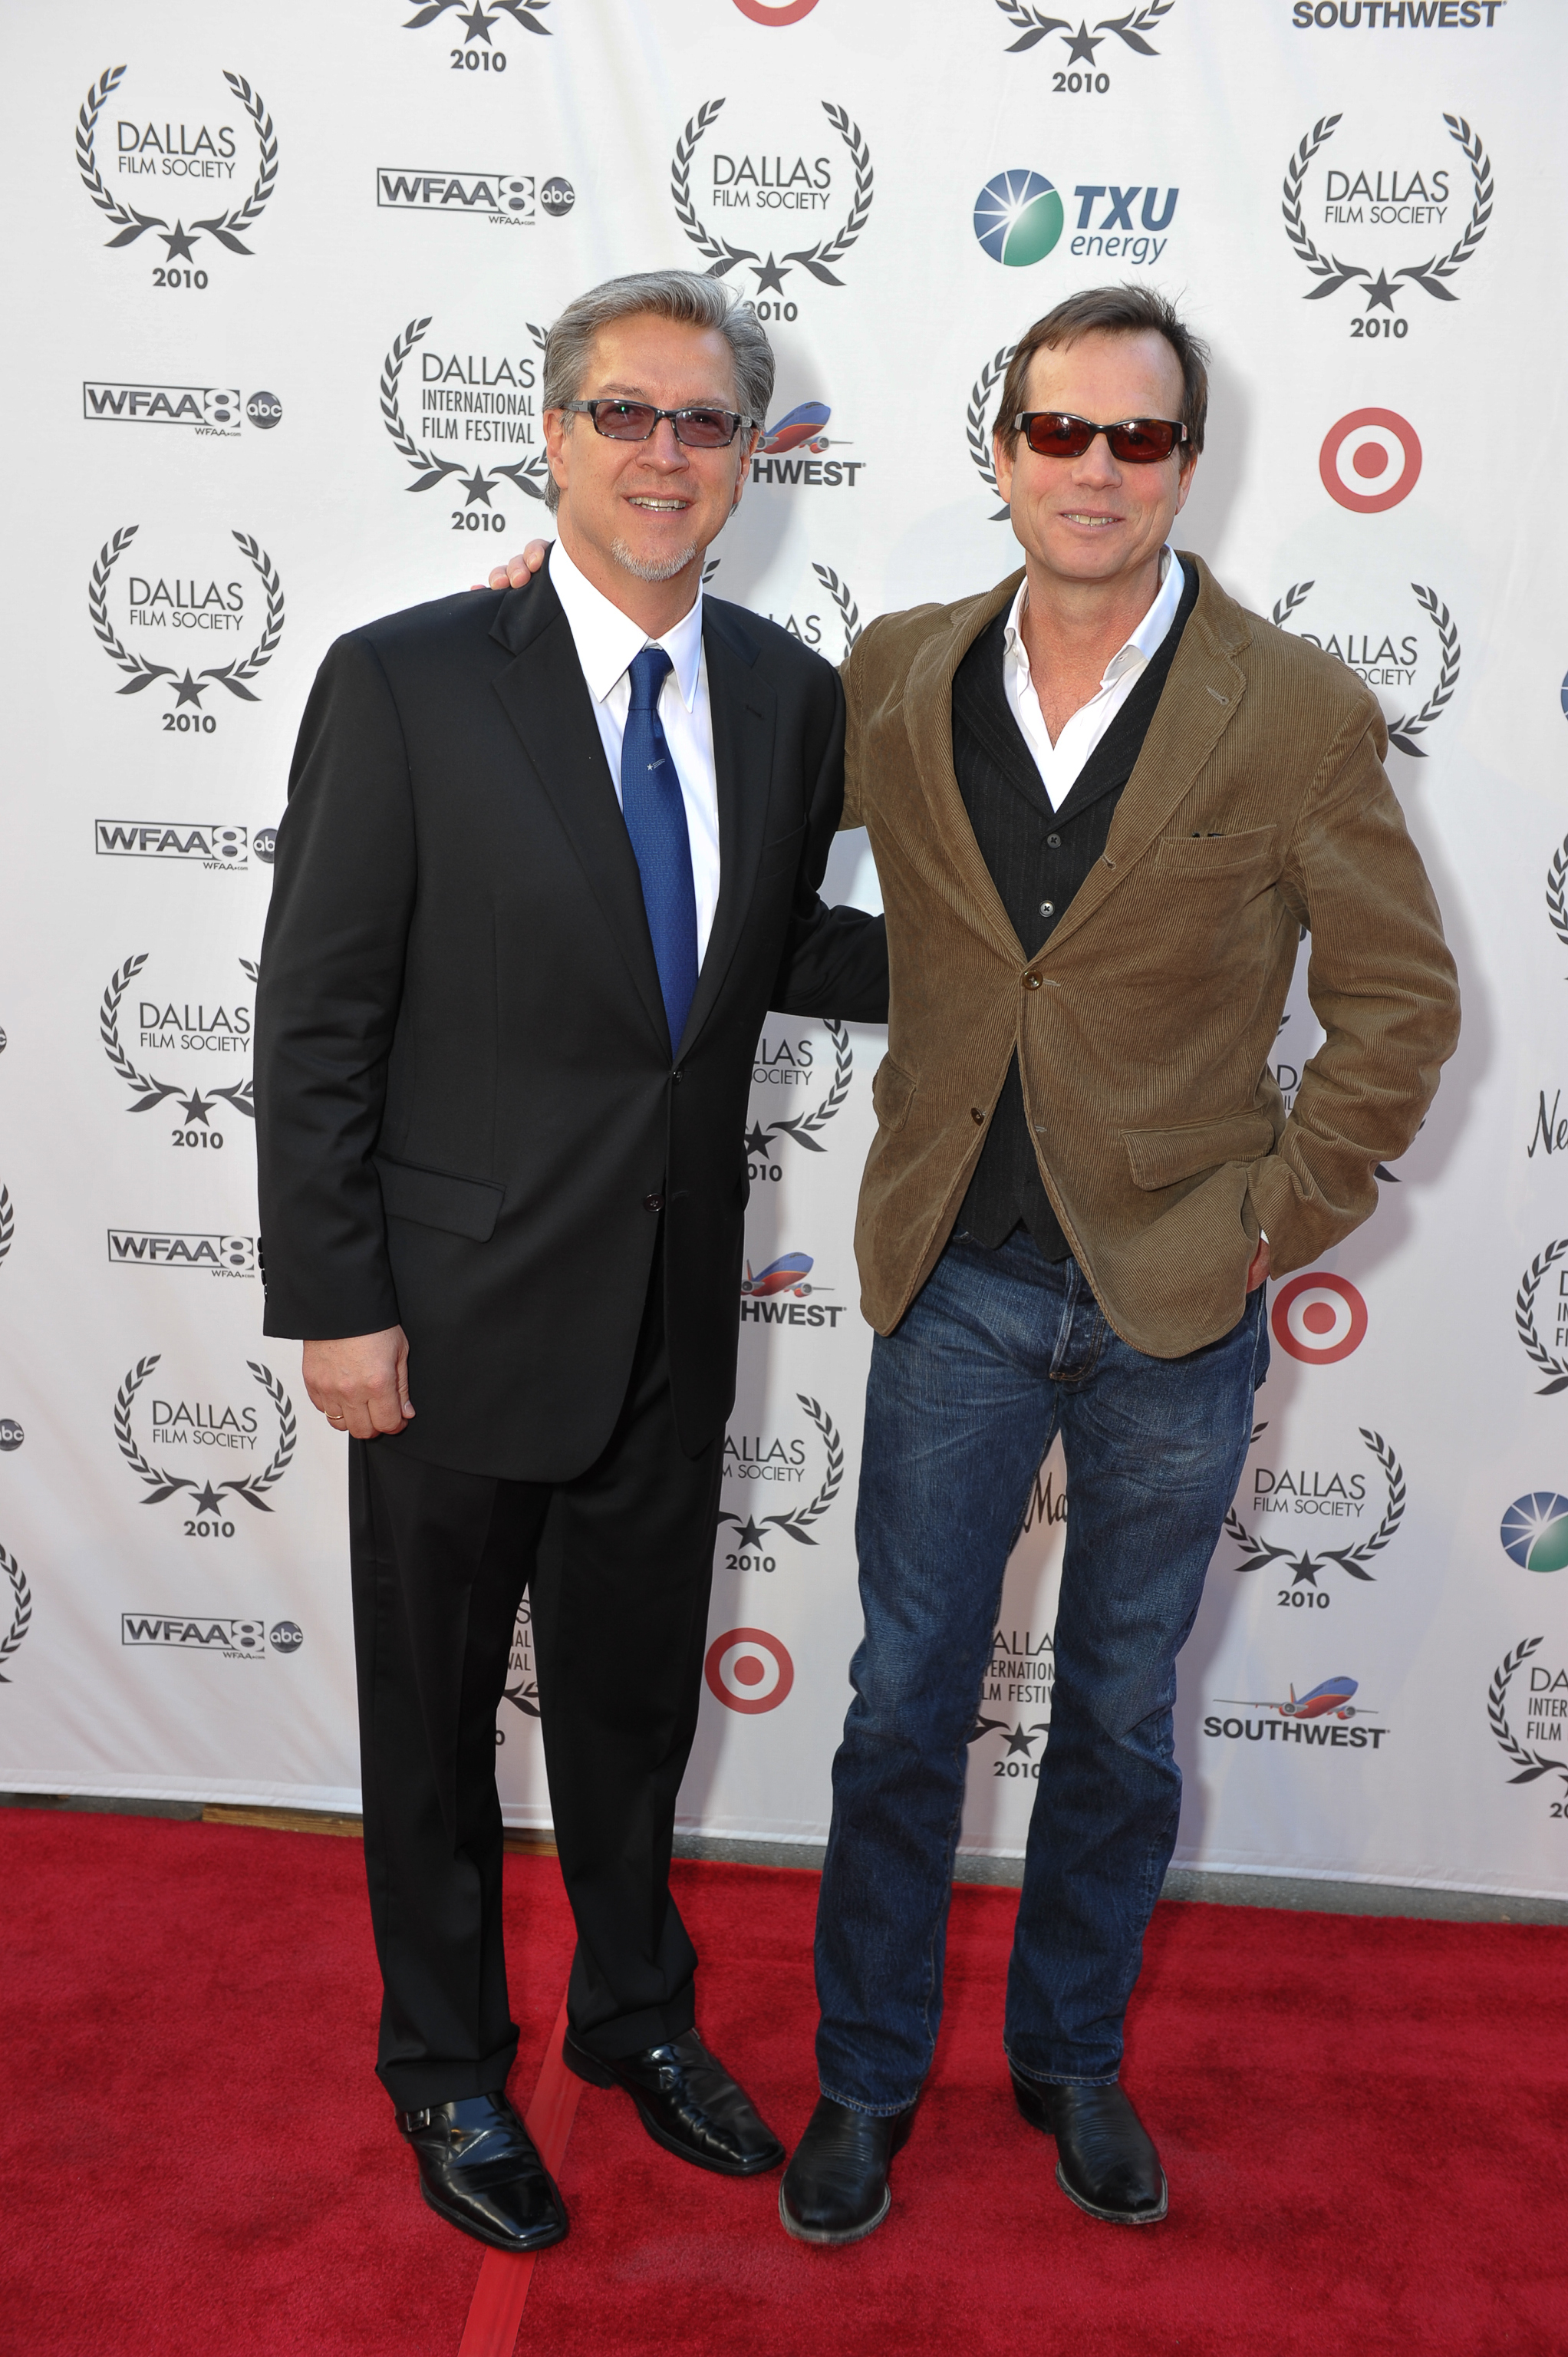 Michael Cain and Bill Paxton 2010 DALLAS International Film Festival OPENING NIGHT Red Carpet